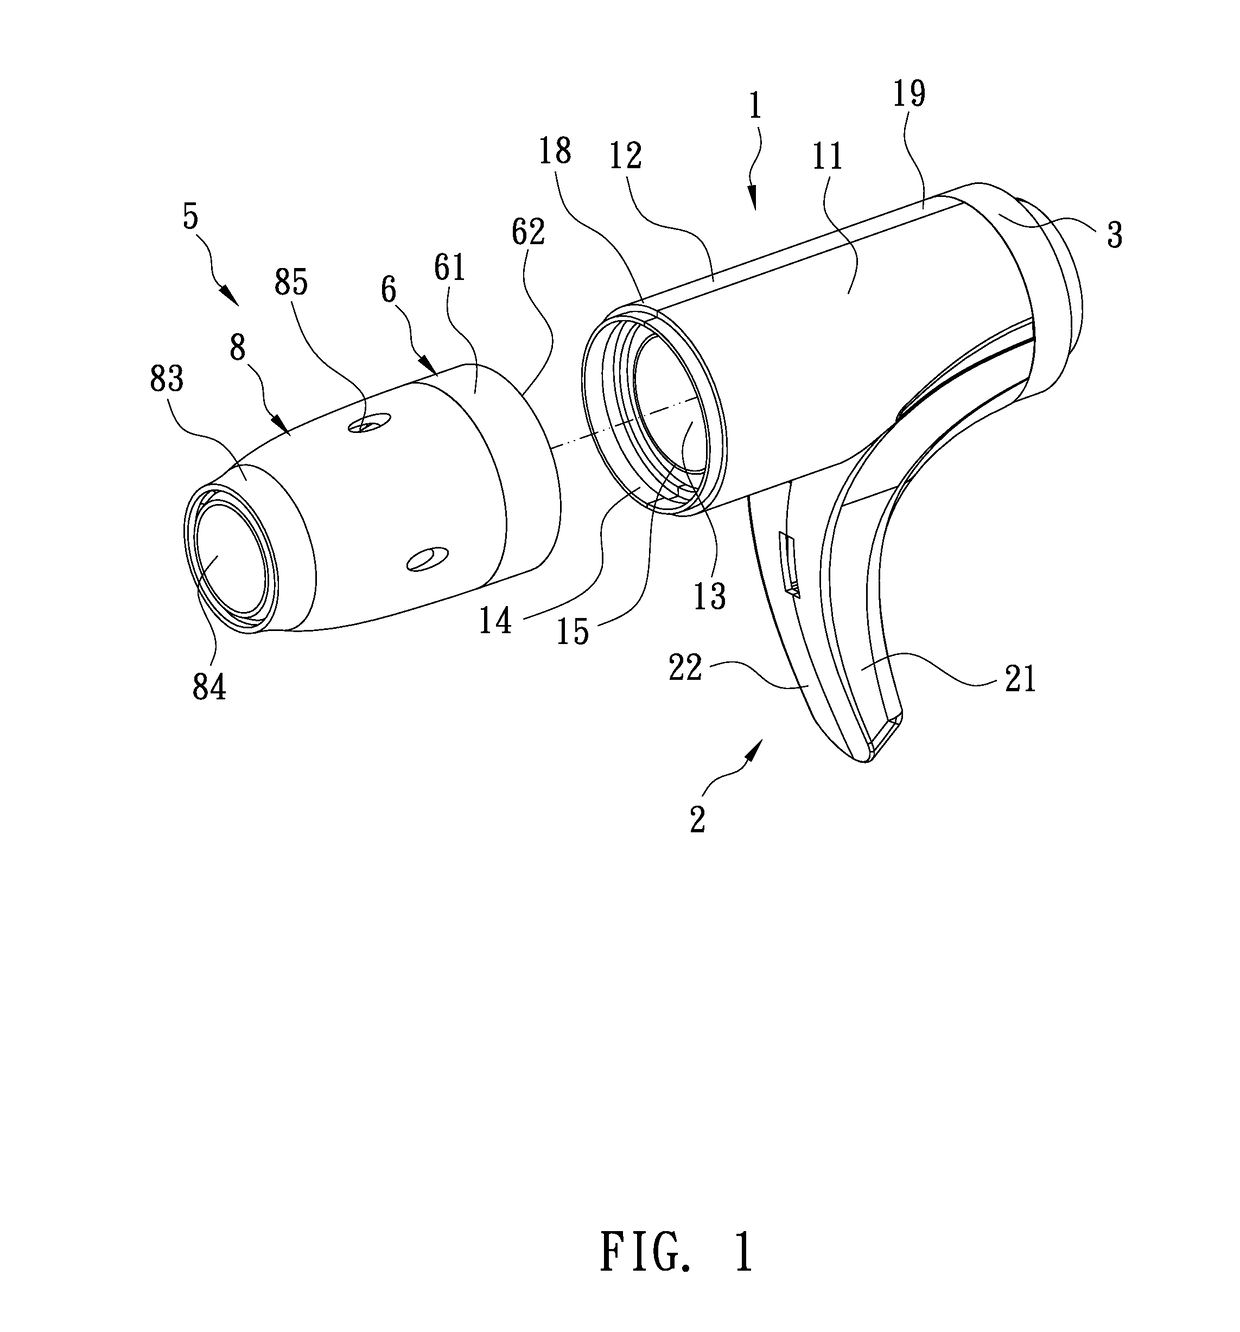 Hair dryer with improved outlet unit